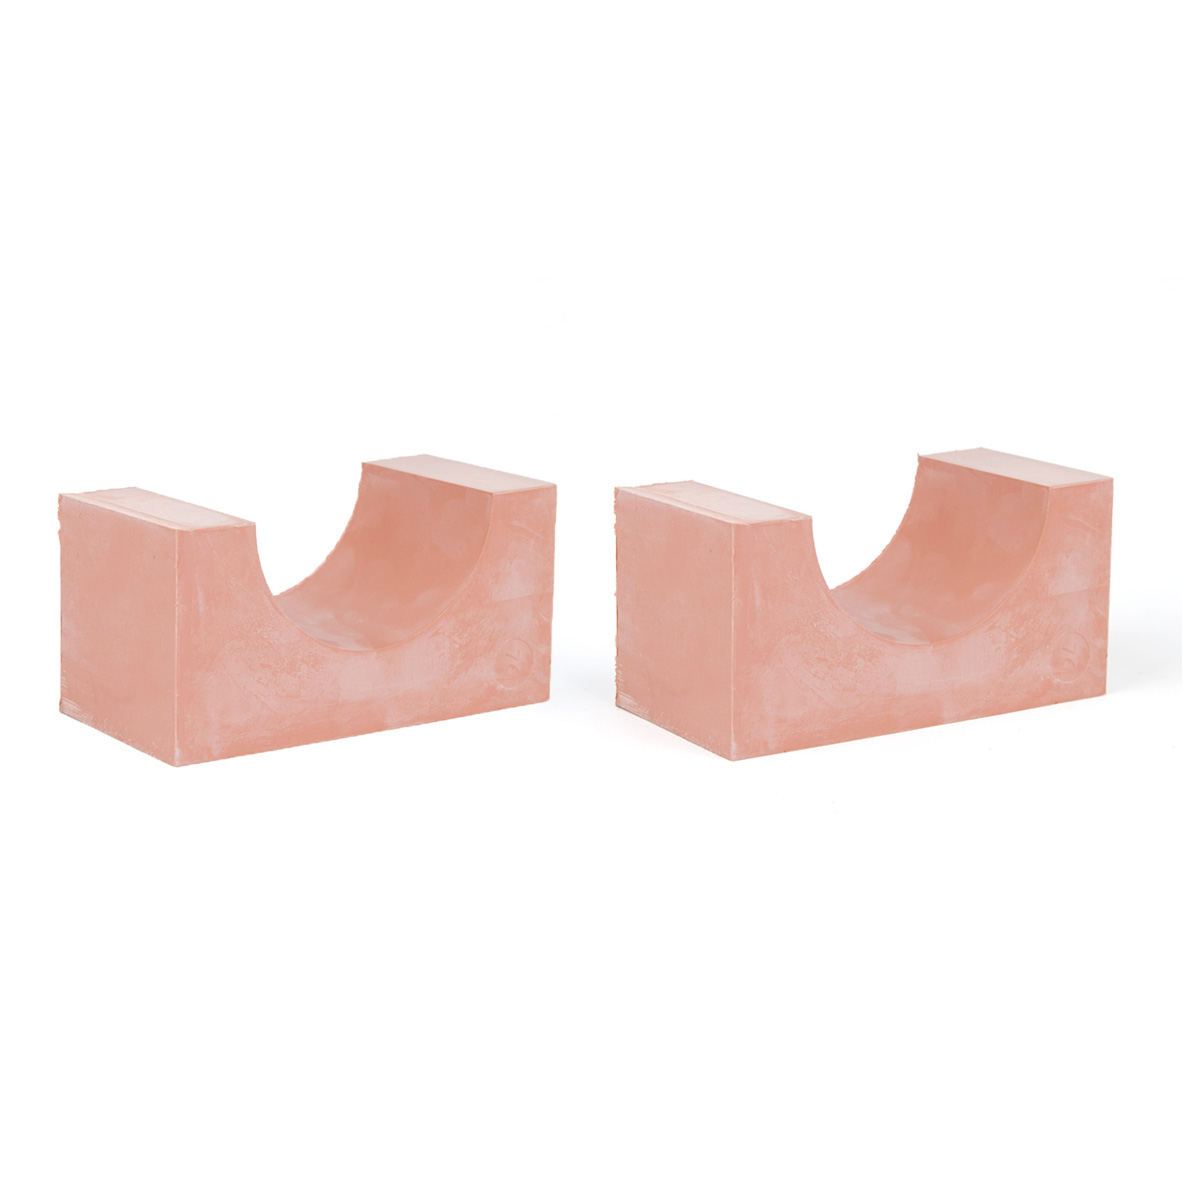 120-76*2 Set of 2 half insert block lycron, 120-76 for cable/pipe diam. 75.5-77.5mm